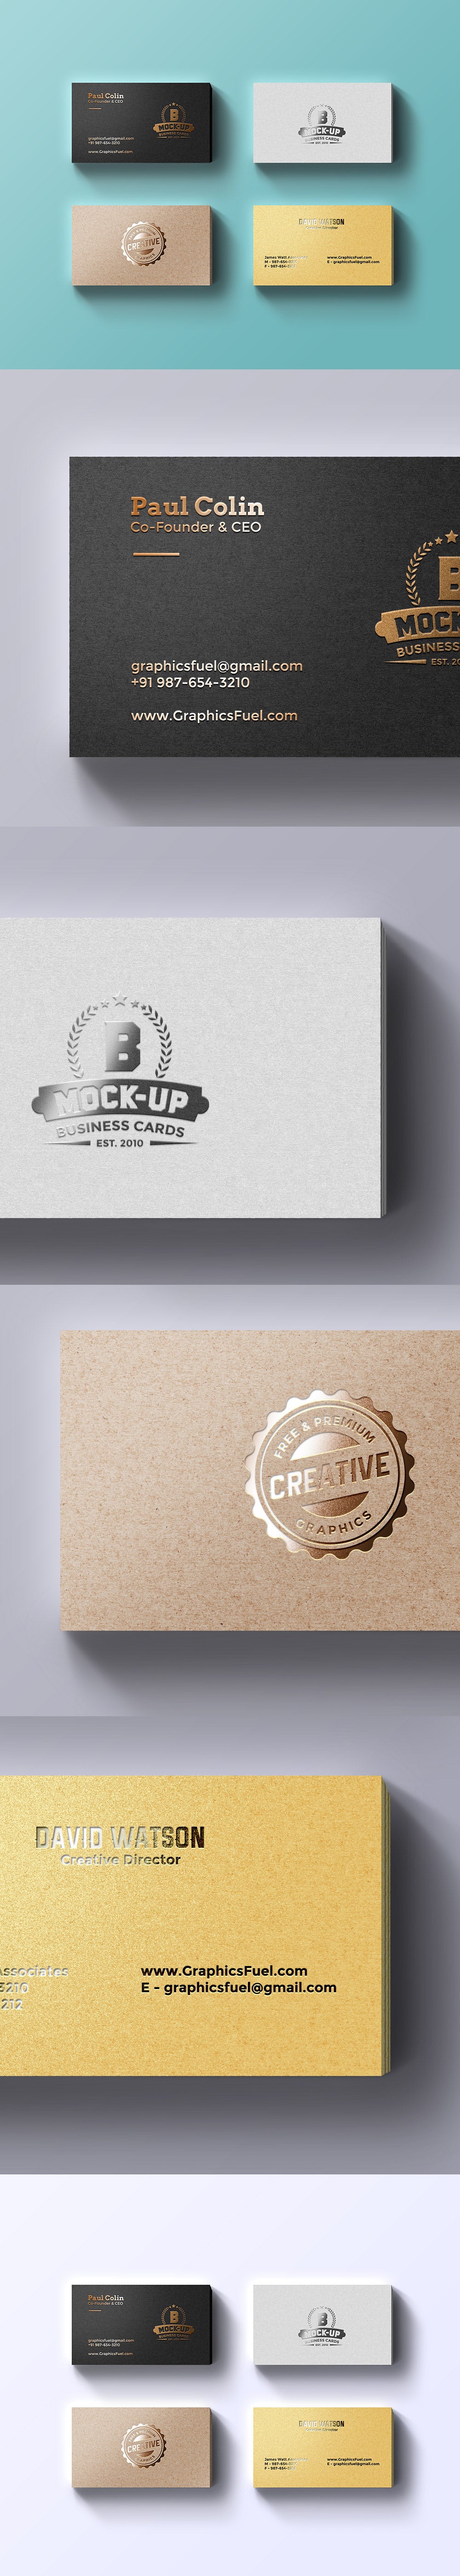 Free Collection of Foil Business Cards Mockup PSD